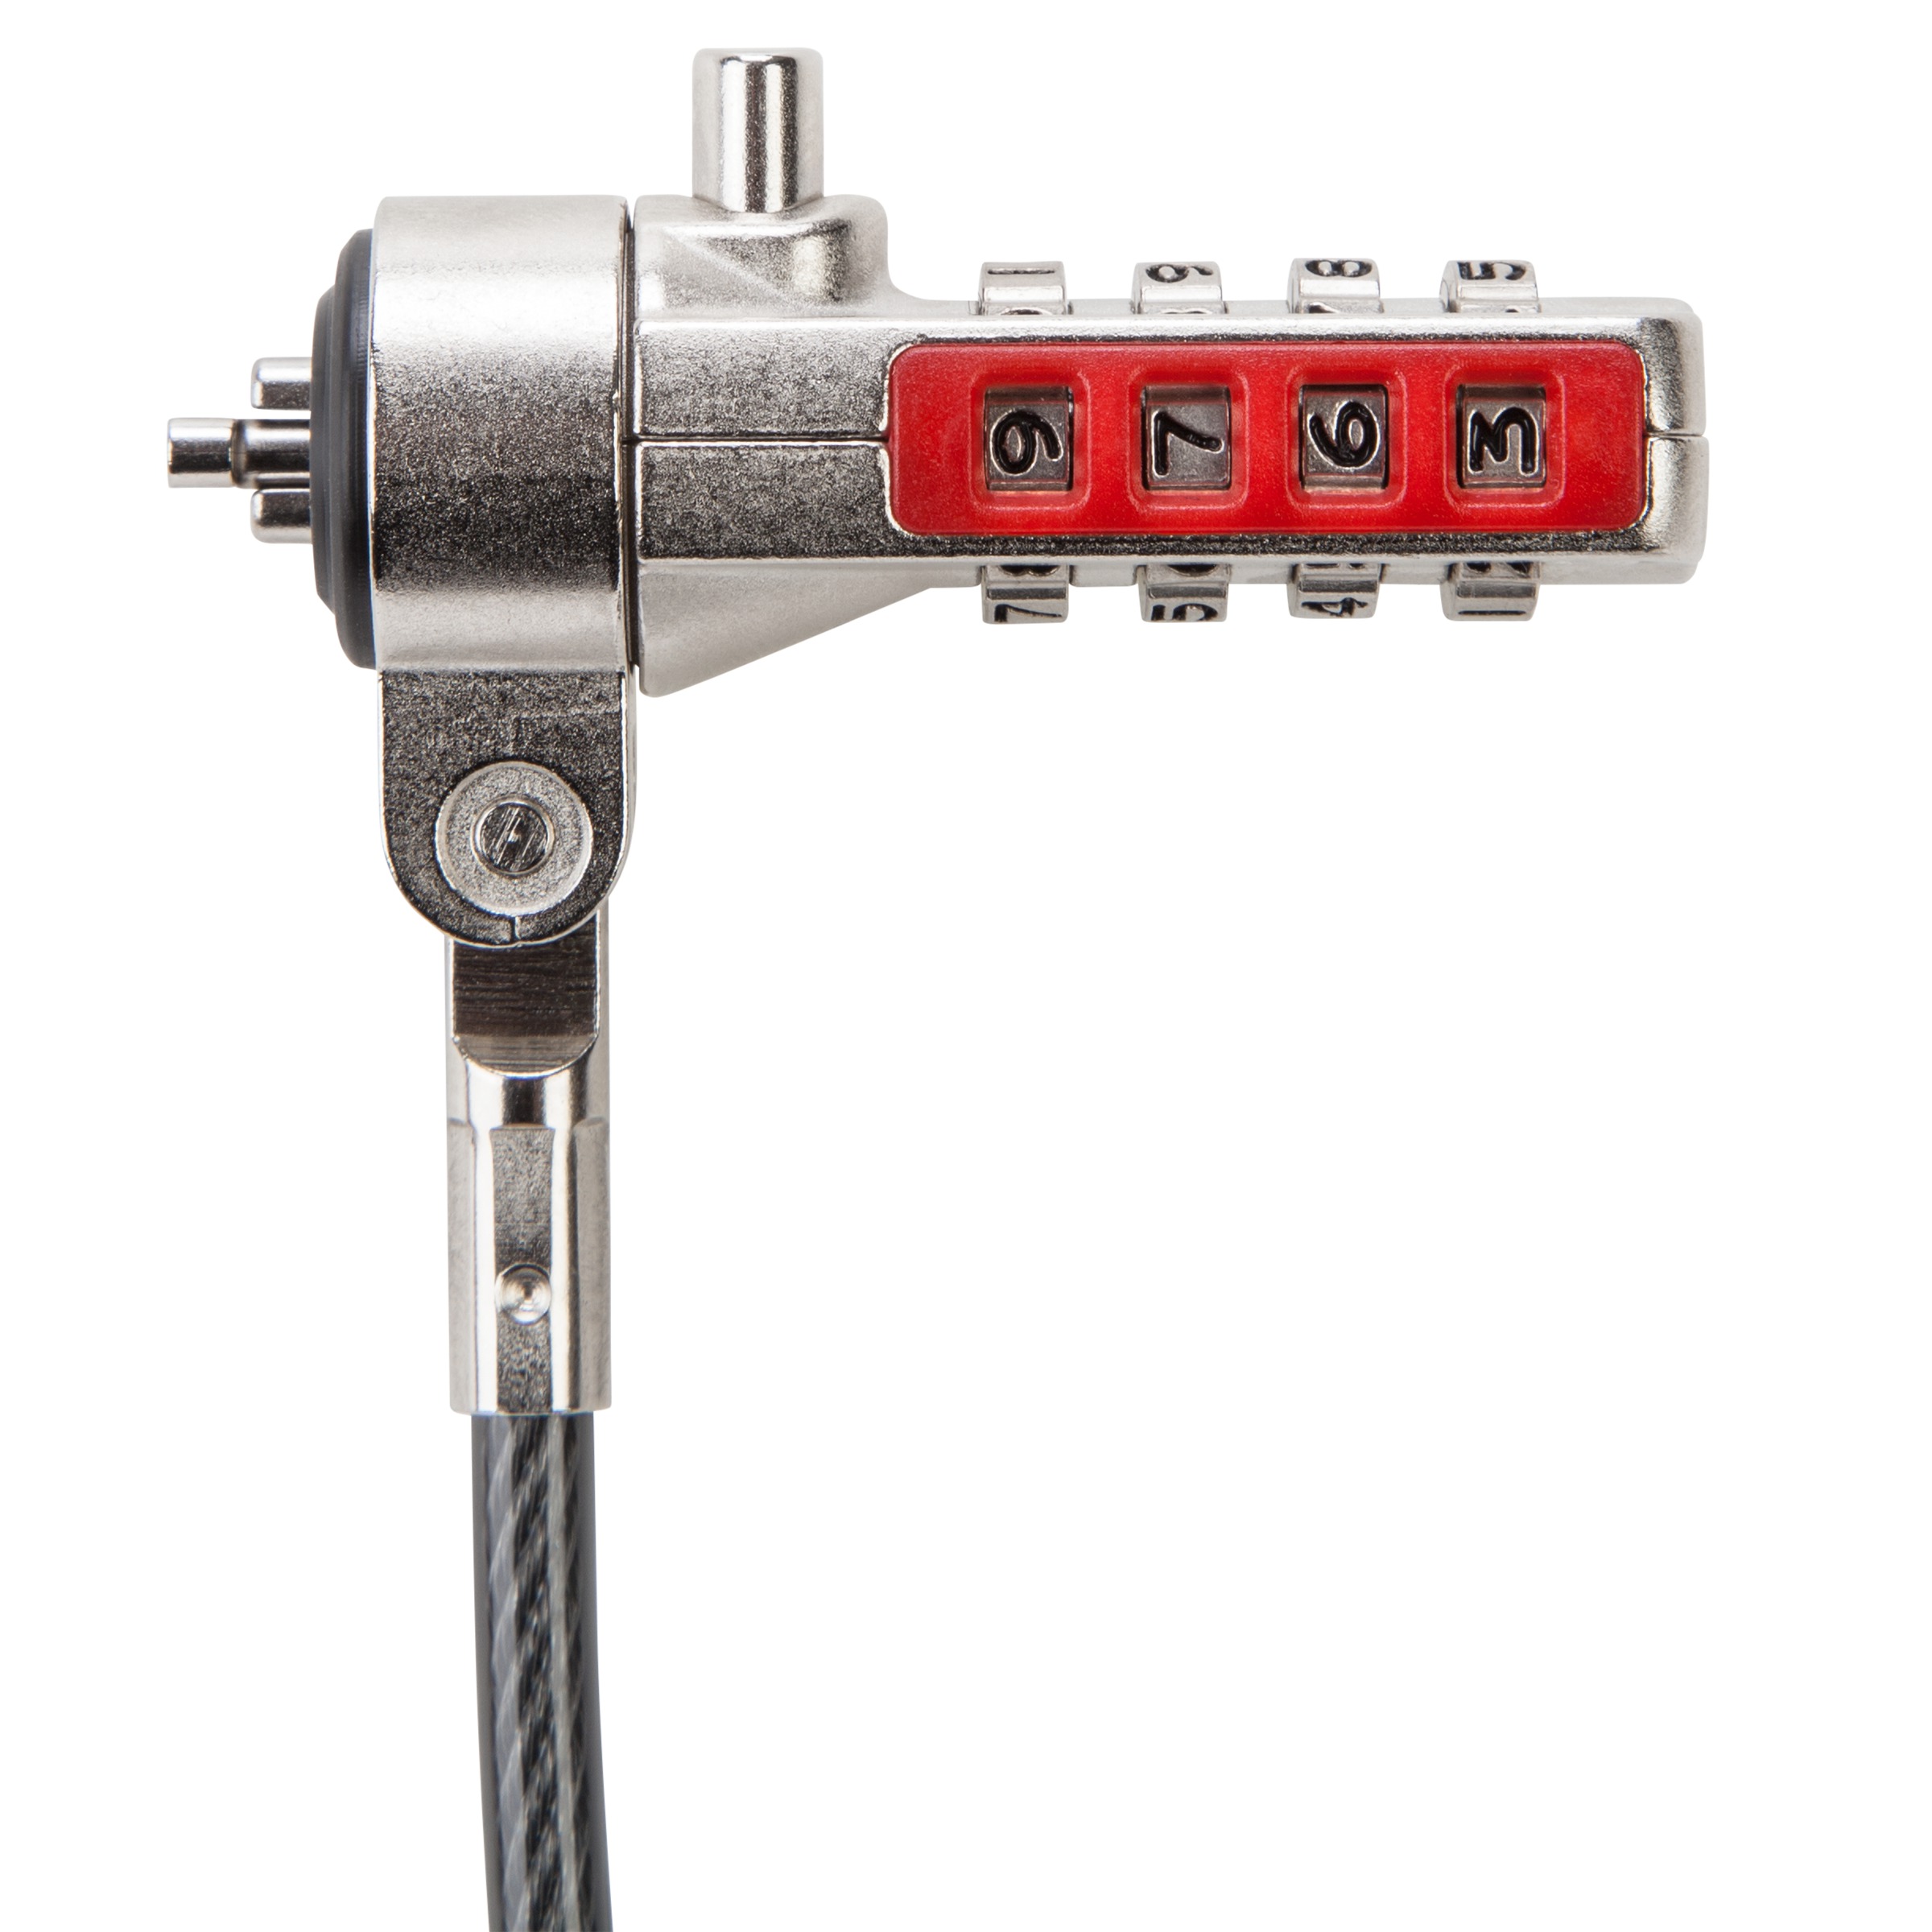  - DEFCON™ T-Lock Resettable Combo Cable Lock 1